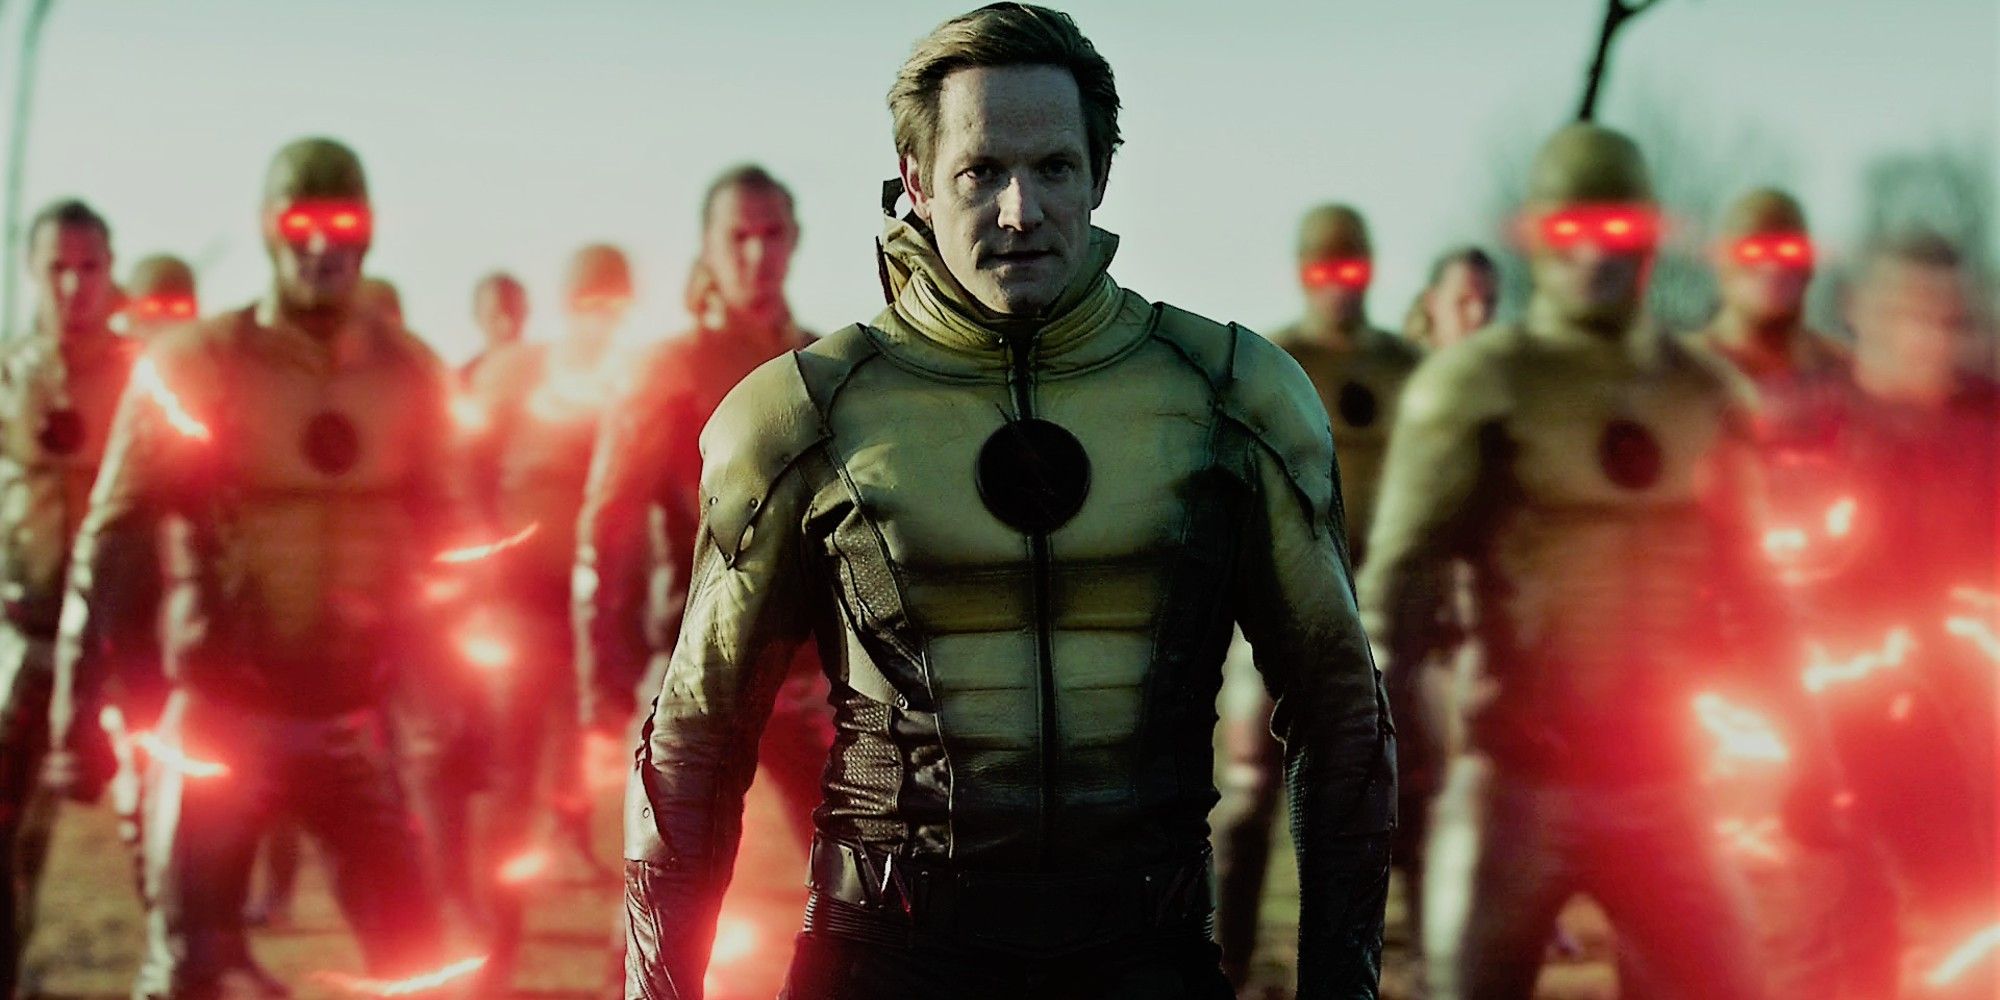 Eobard Thawne leads the time remnants on Legends of Tomorrow